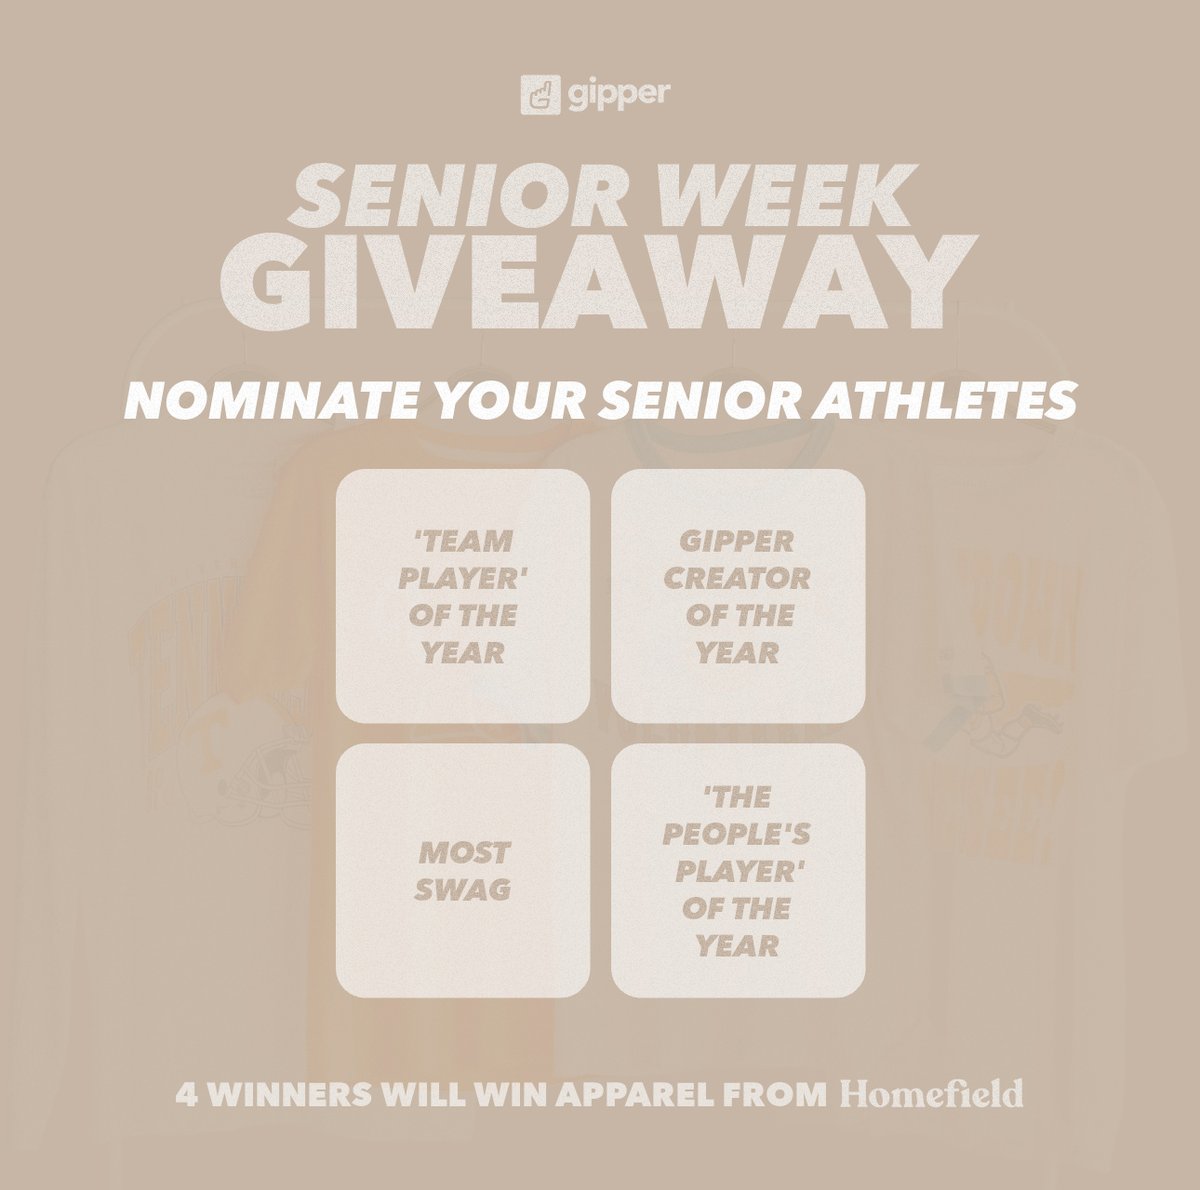 Enter your standout students & they’ll have a chance to win some cool college apparel from @HomefieldApparl 😎 HOW TO ENTER: 1. Select a Gipper Template from our ‘Award’ Category 2. Customize & type-in the nomination title 3. Share on TW or IG with #GipperSeniorWeek & @GoGipper